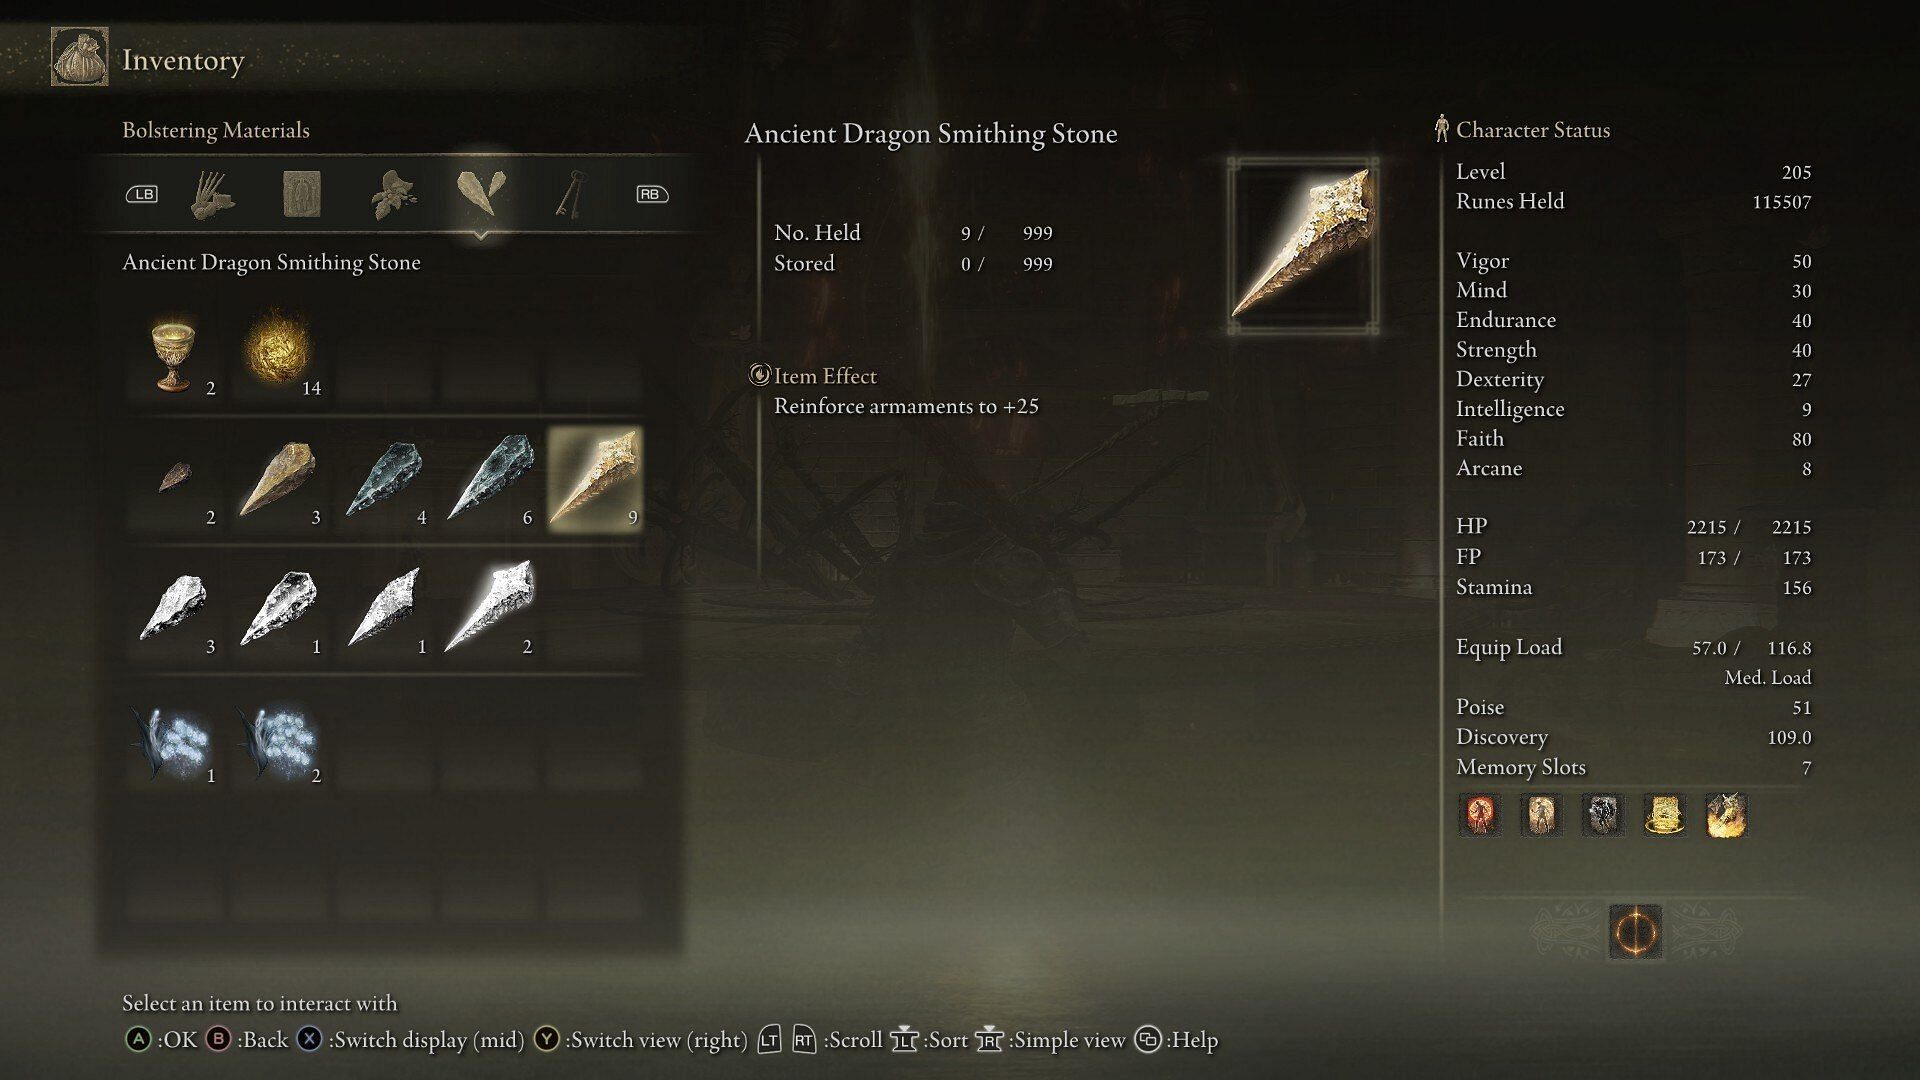 The Ancient Dragon Smithing Stone in Elden Ring (Image via FromSoftware)